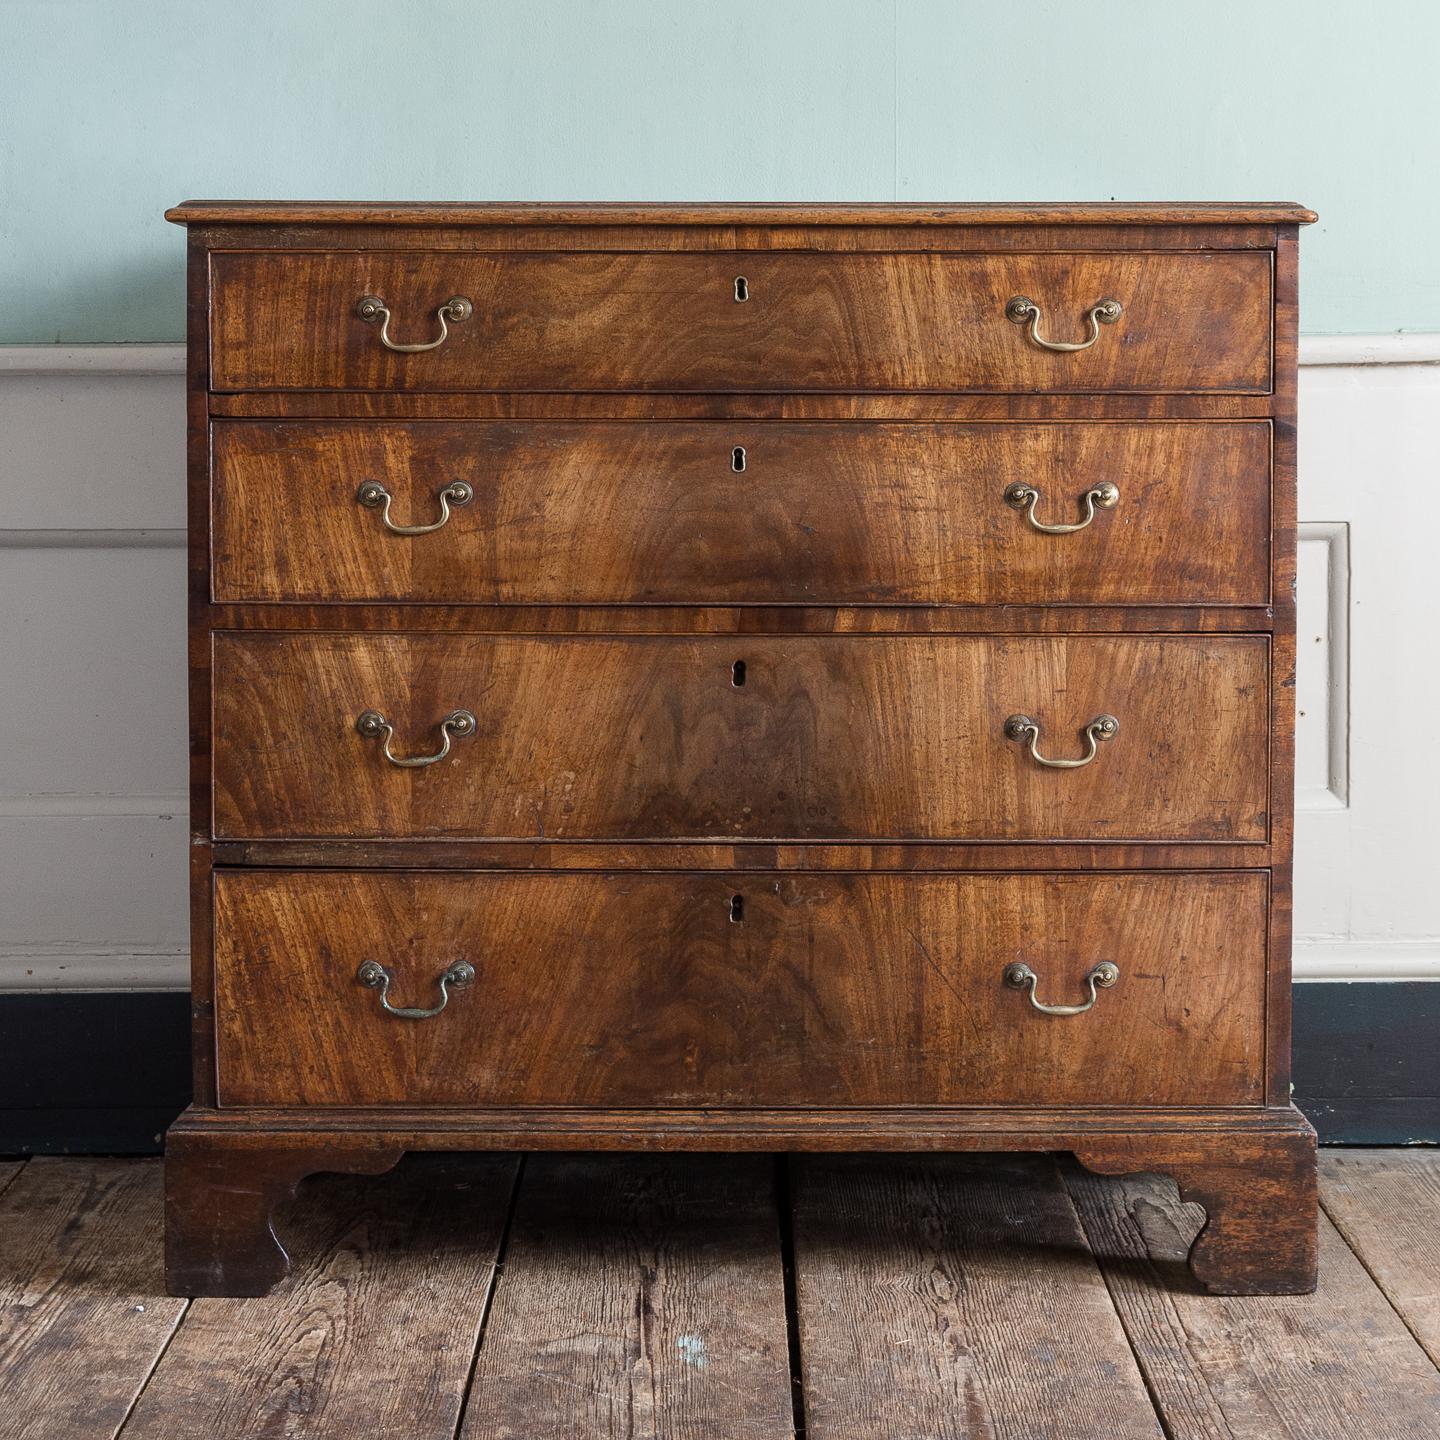 A George III mahogancy chest of drawers, with four graduated drawers retaining original brass furniture, keys not extant, on shaped bracket feet.

The piece is structurally sound and all drawers run well. There is a small section of cockbeading